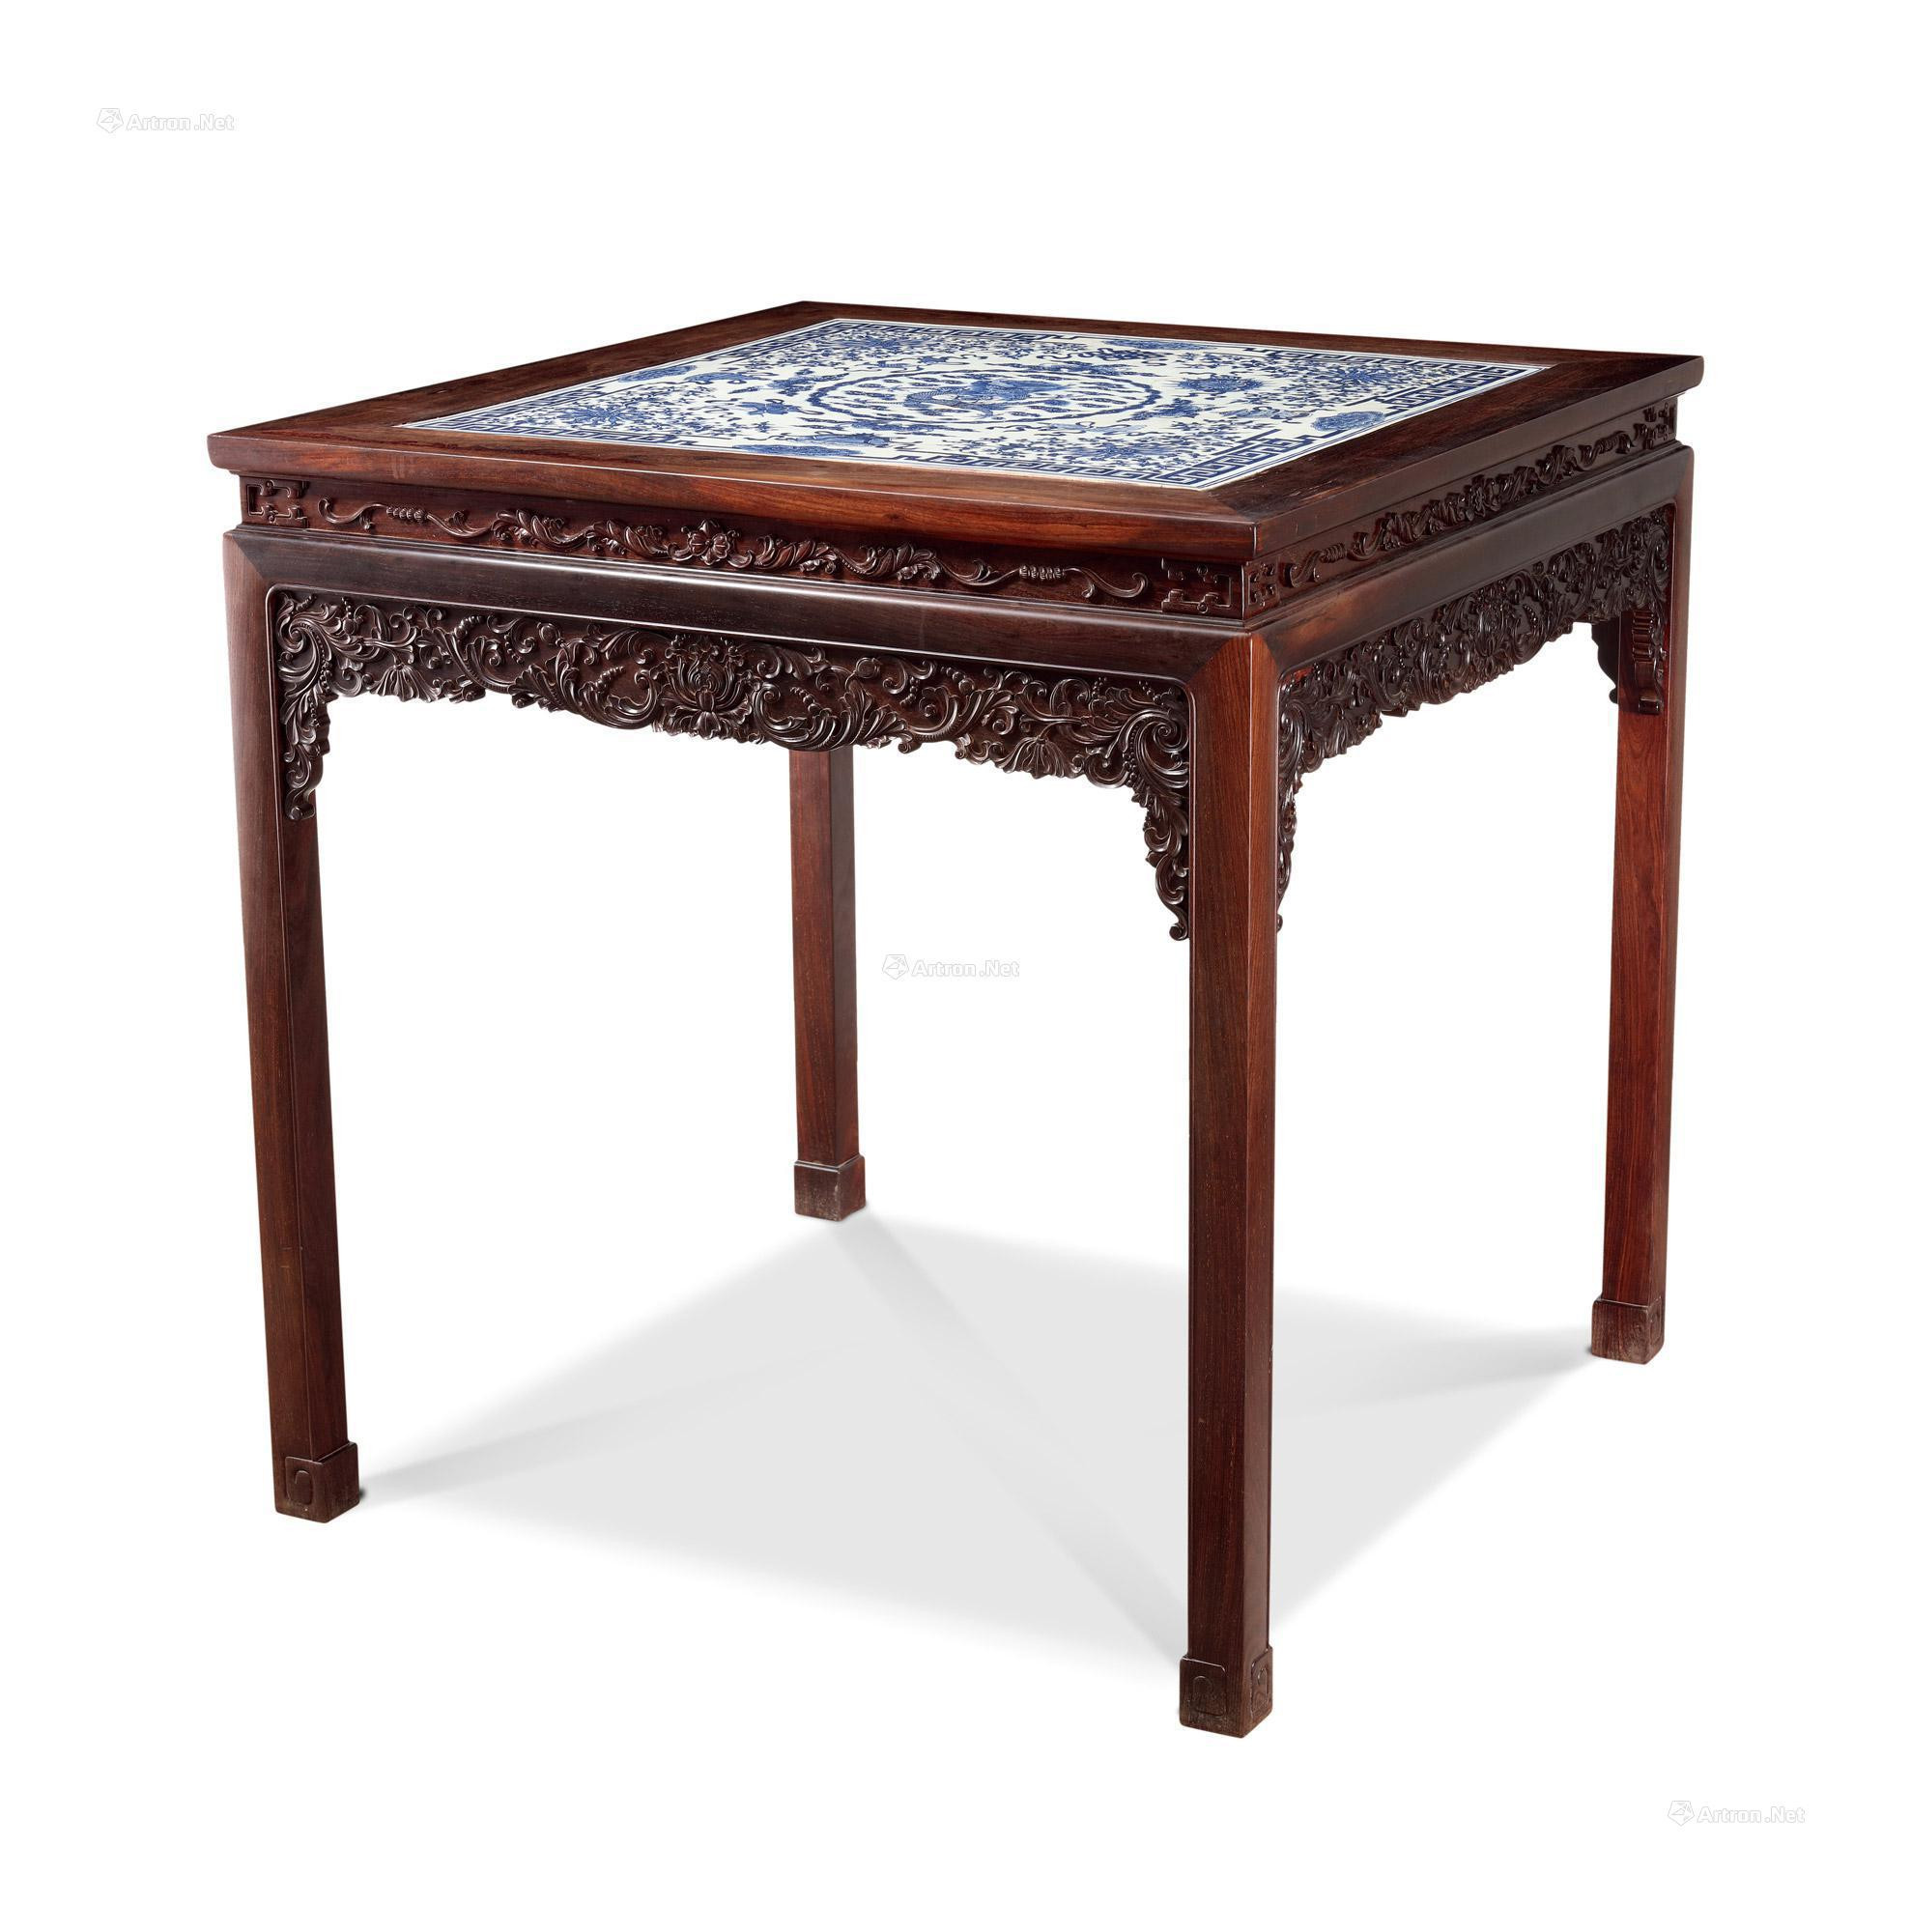 A JIQING TANG MADE ZITAN INLAID MID-QING DYNASTY’S BLUE AND WHITE DRAGON PATTERN PORCELaIN PLAQUE  TABLE